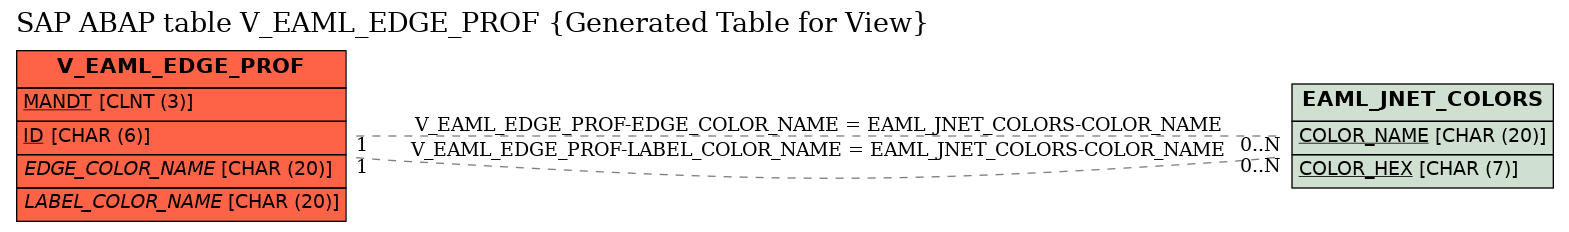 E-R Diagram for table V_EAML_EDGE_PROF (Generated Table for View)